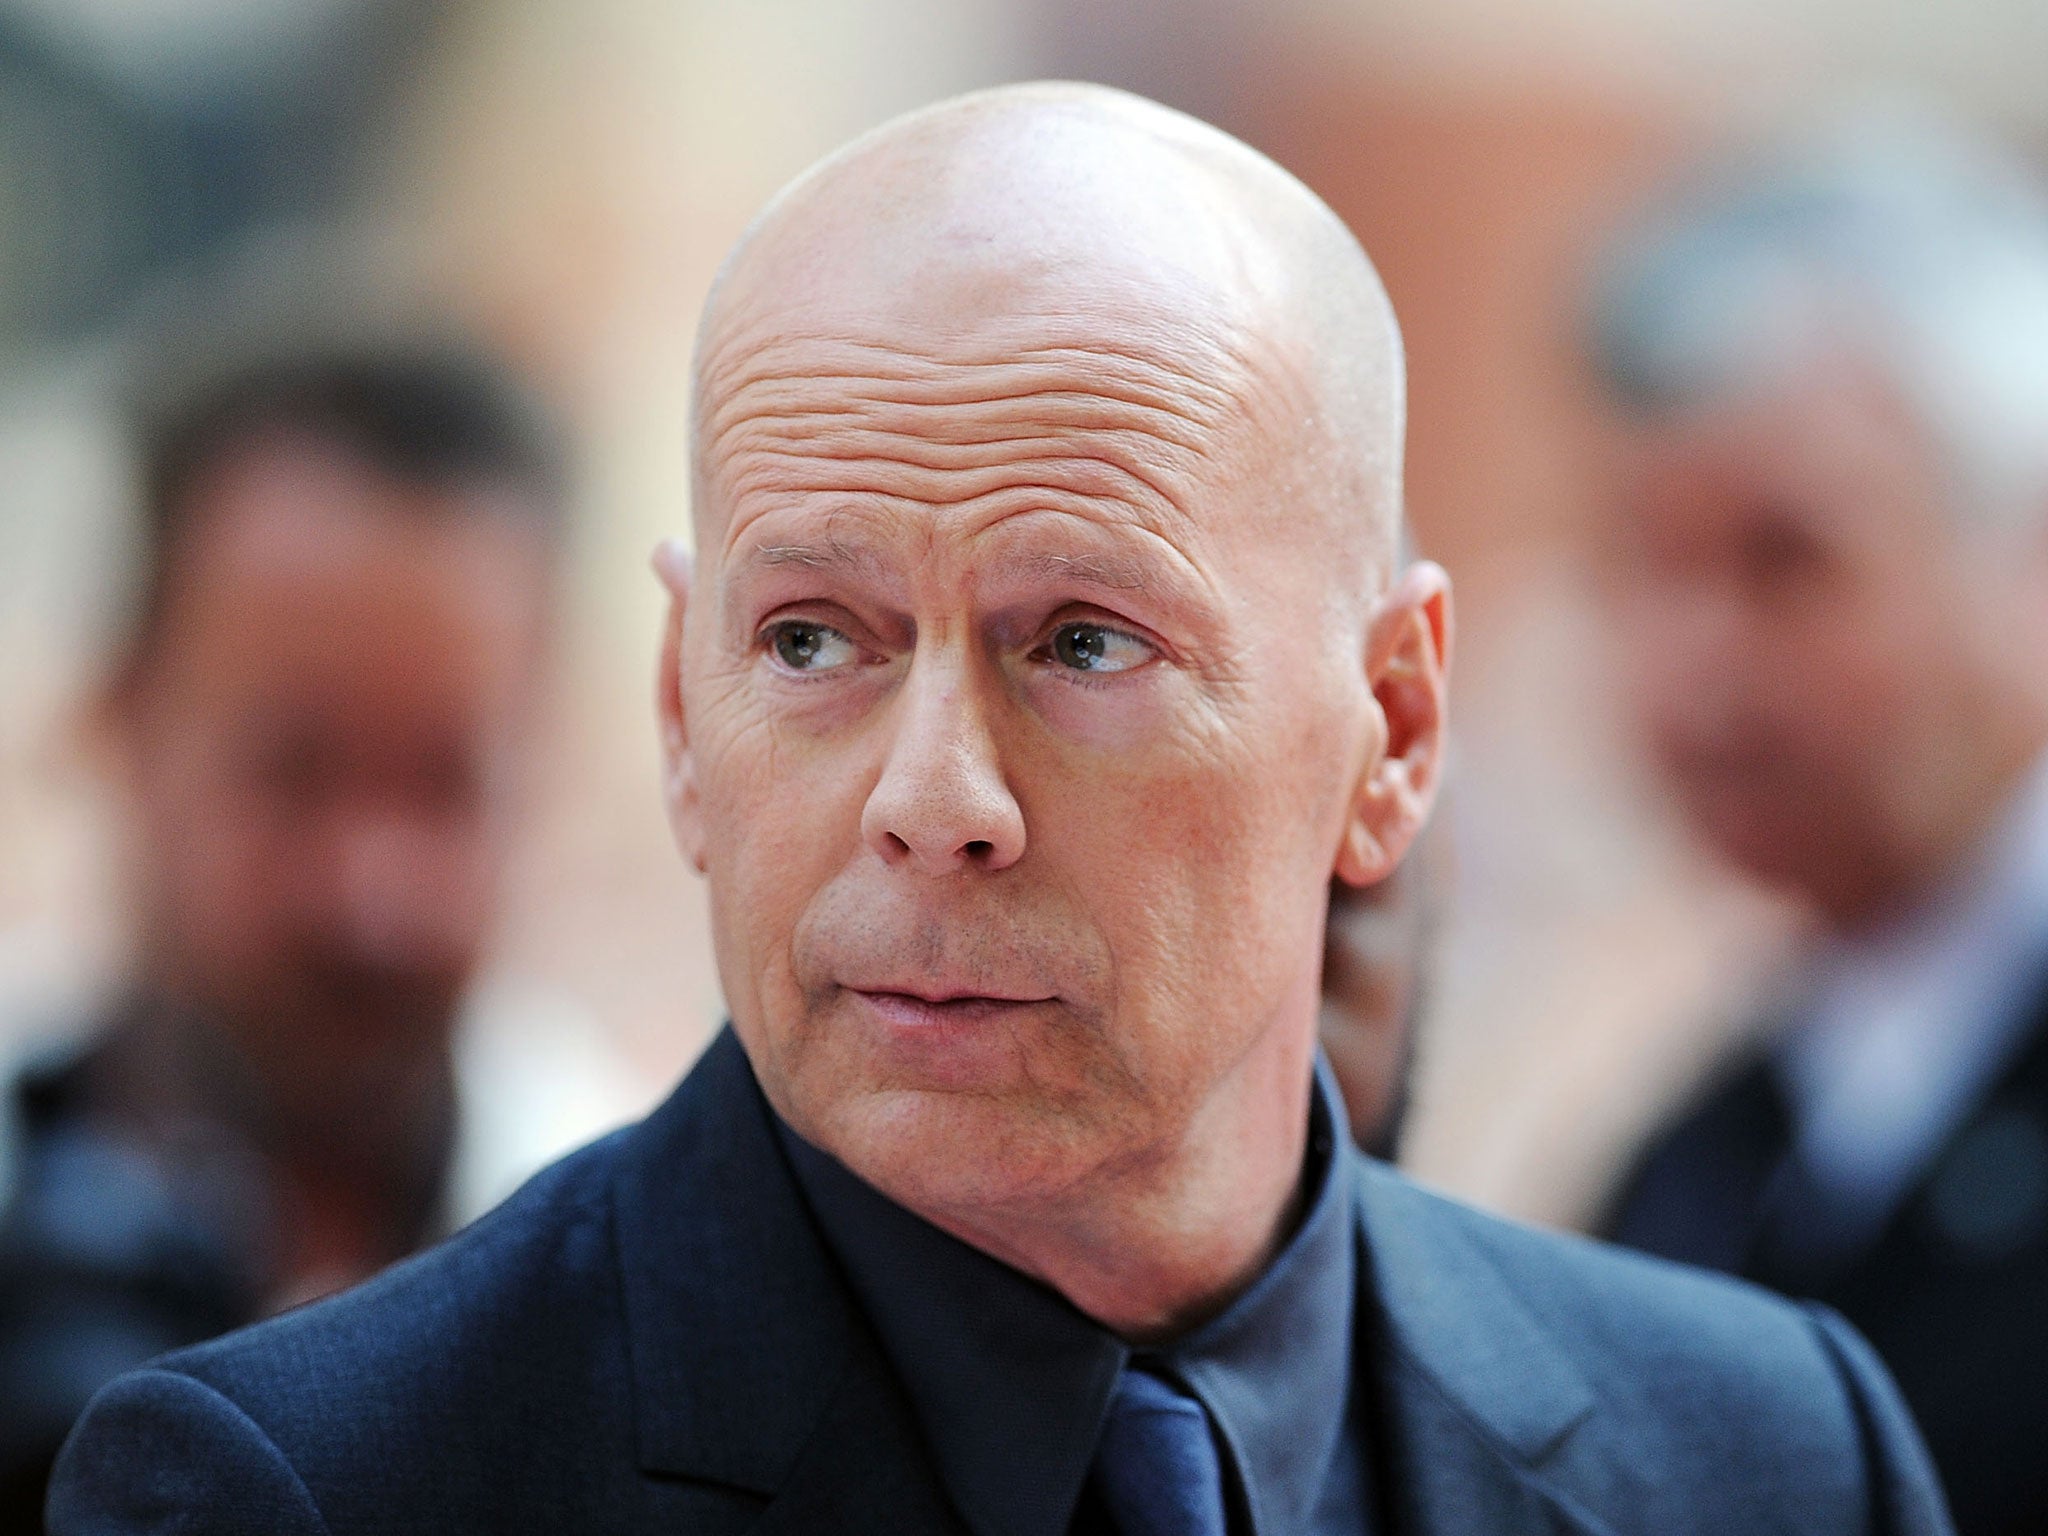 Bruce Willis is known for the Die Hard franchise